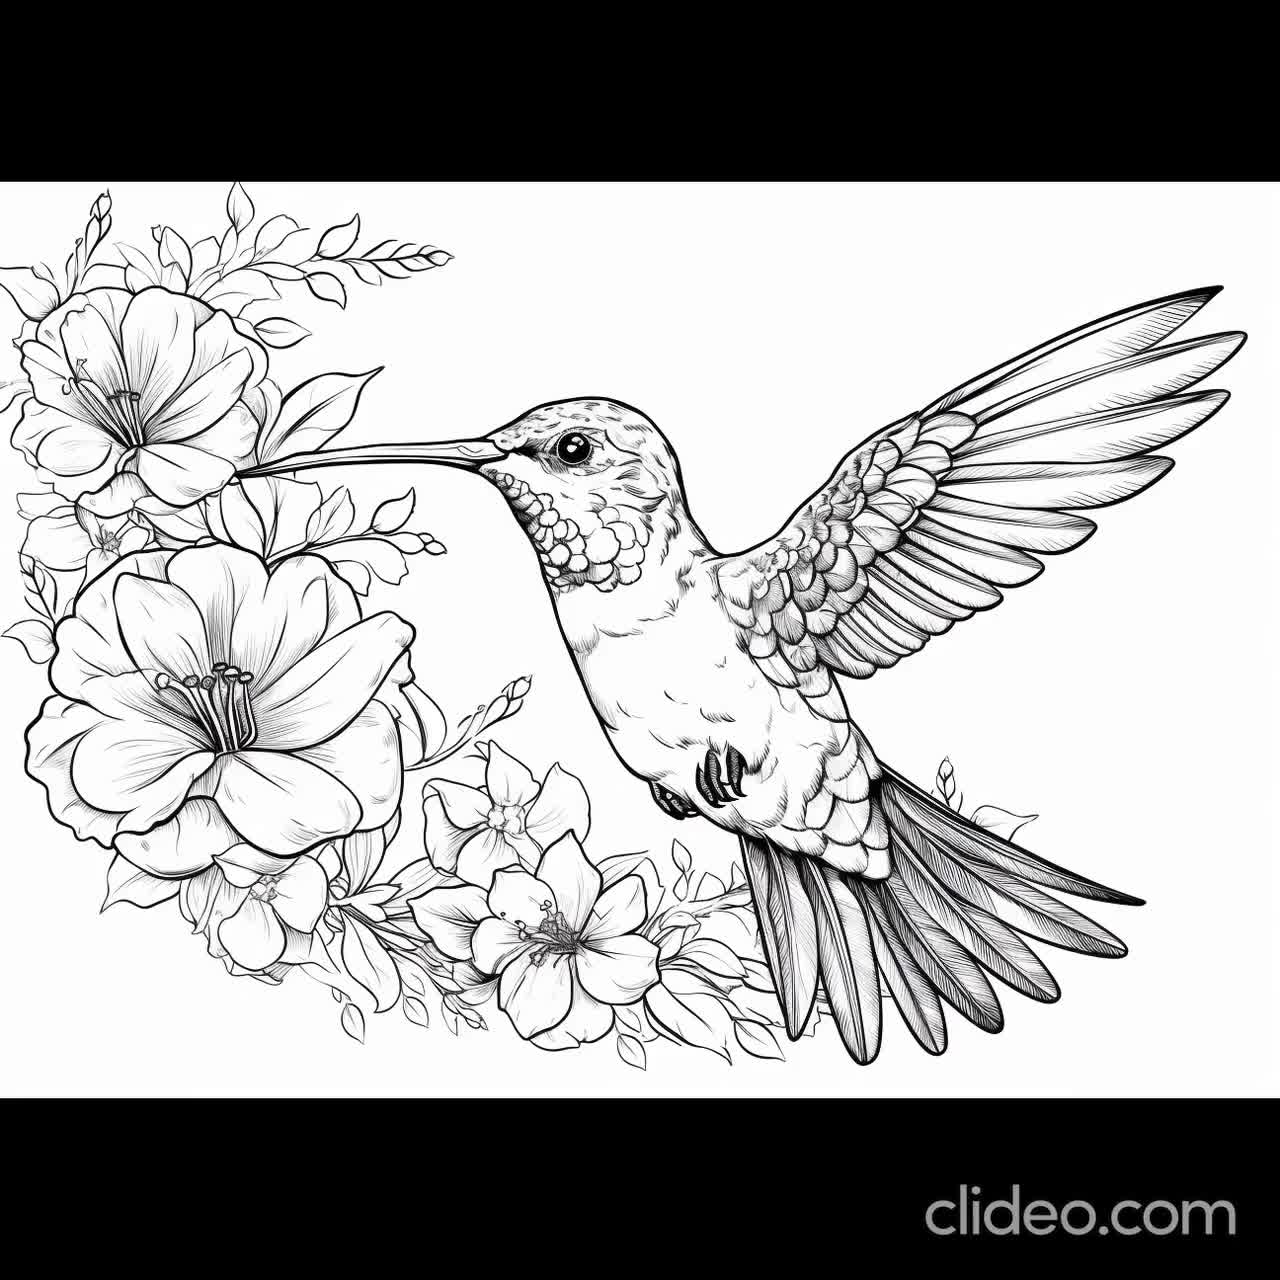 my coloring book hummingbird and flowers: hummingbird and flowers coloring  book / adult coloring book motivational / adult coloring books  motivational/coloring book sets for adults relaxation /Perfectly Sized at  8.5 x 11